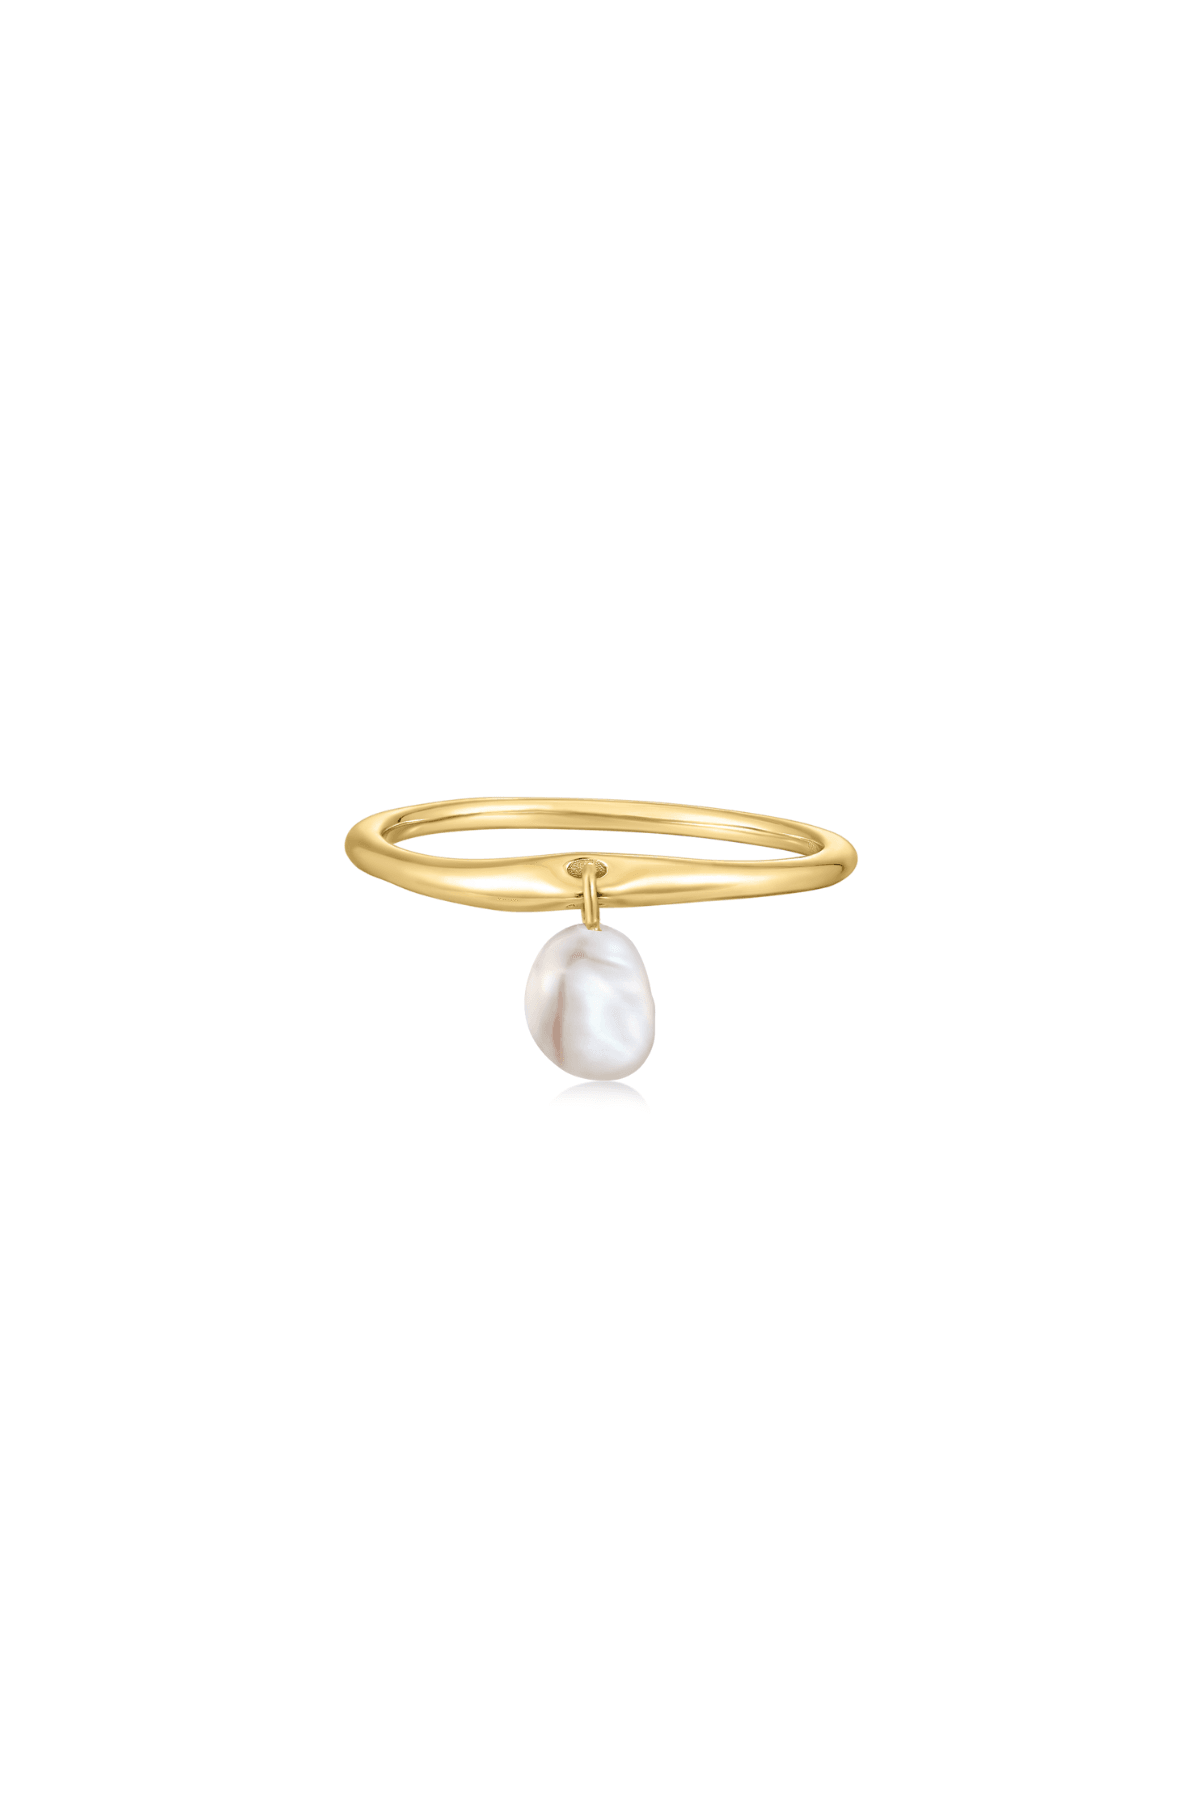 The Luminous Pearl 14ct Gold Vermeil Ring - Molten Store